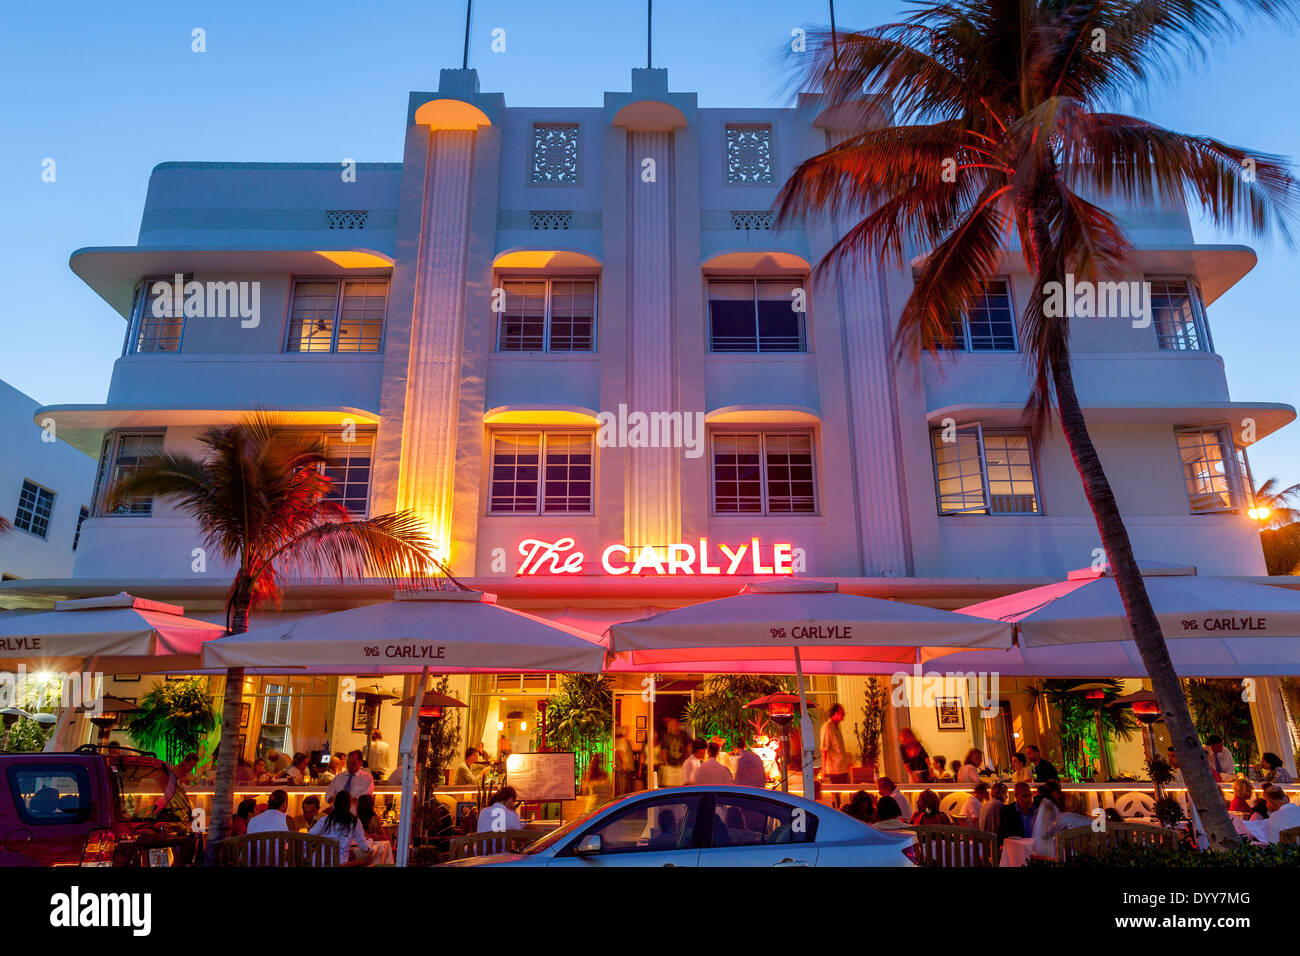 Le Carlyle Hotel, South Beach, Miami, Floride, USA Banque D'Images